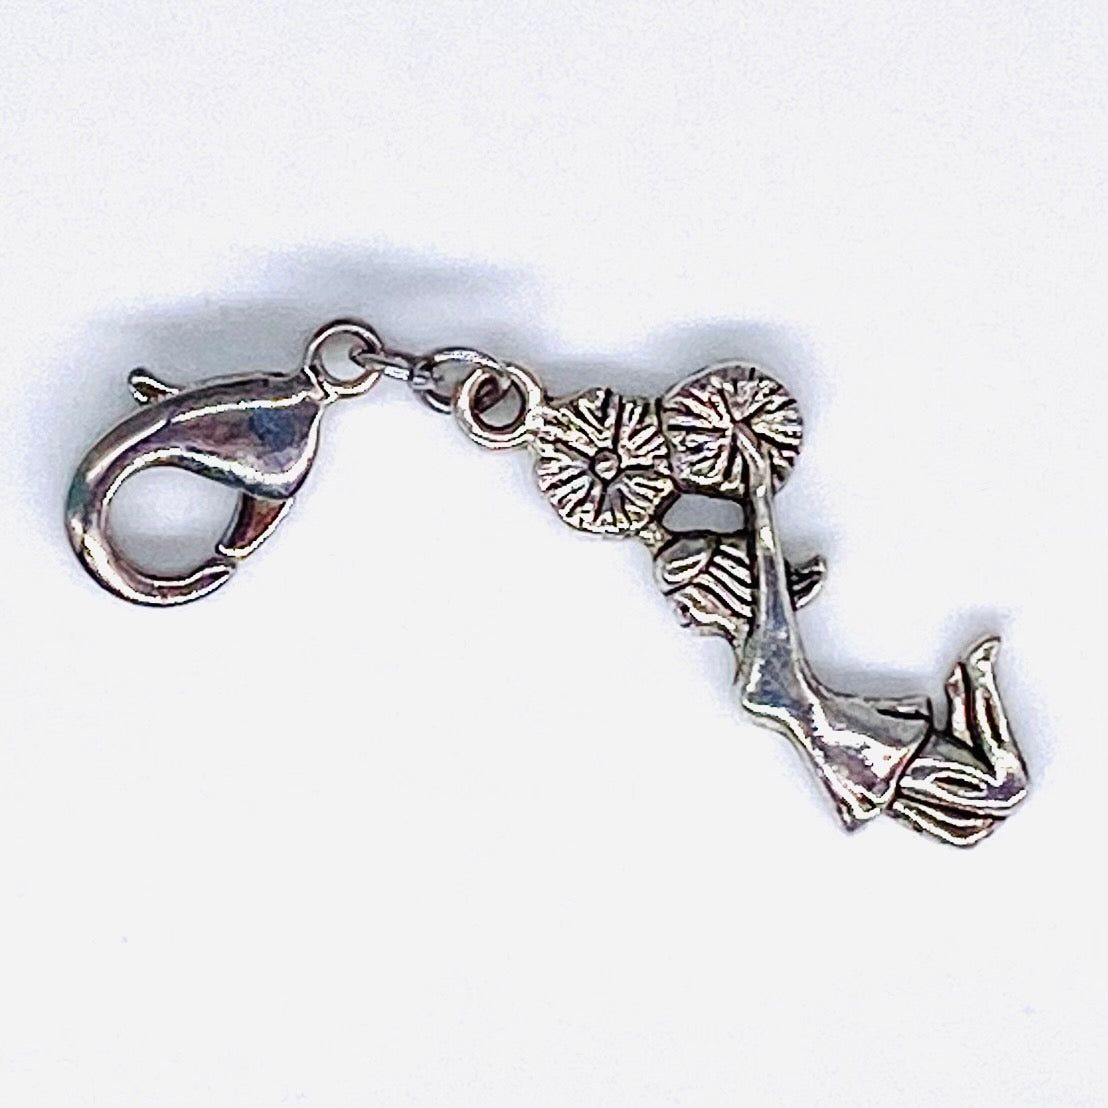 I heart to cheer charms ,Cheerleading Charms, Cheer, Cheerleading,Antique  Silver Tone 15x16mm-B5285